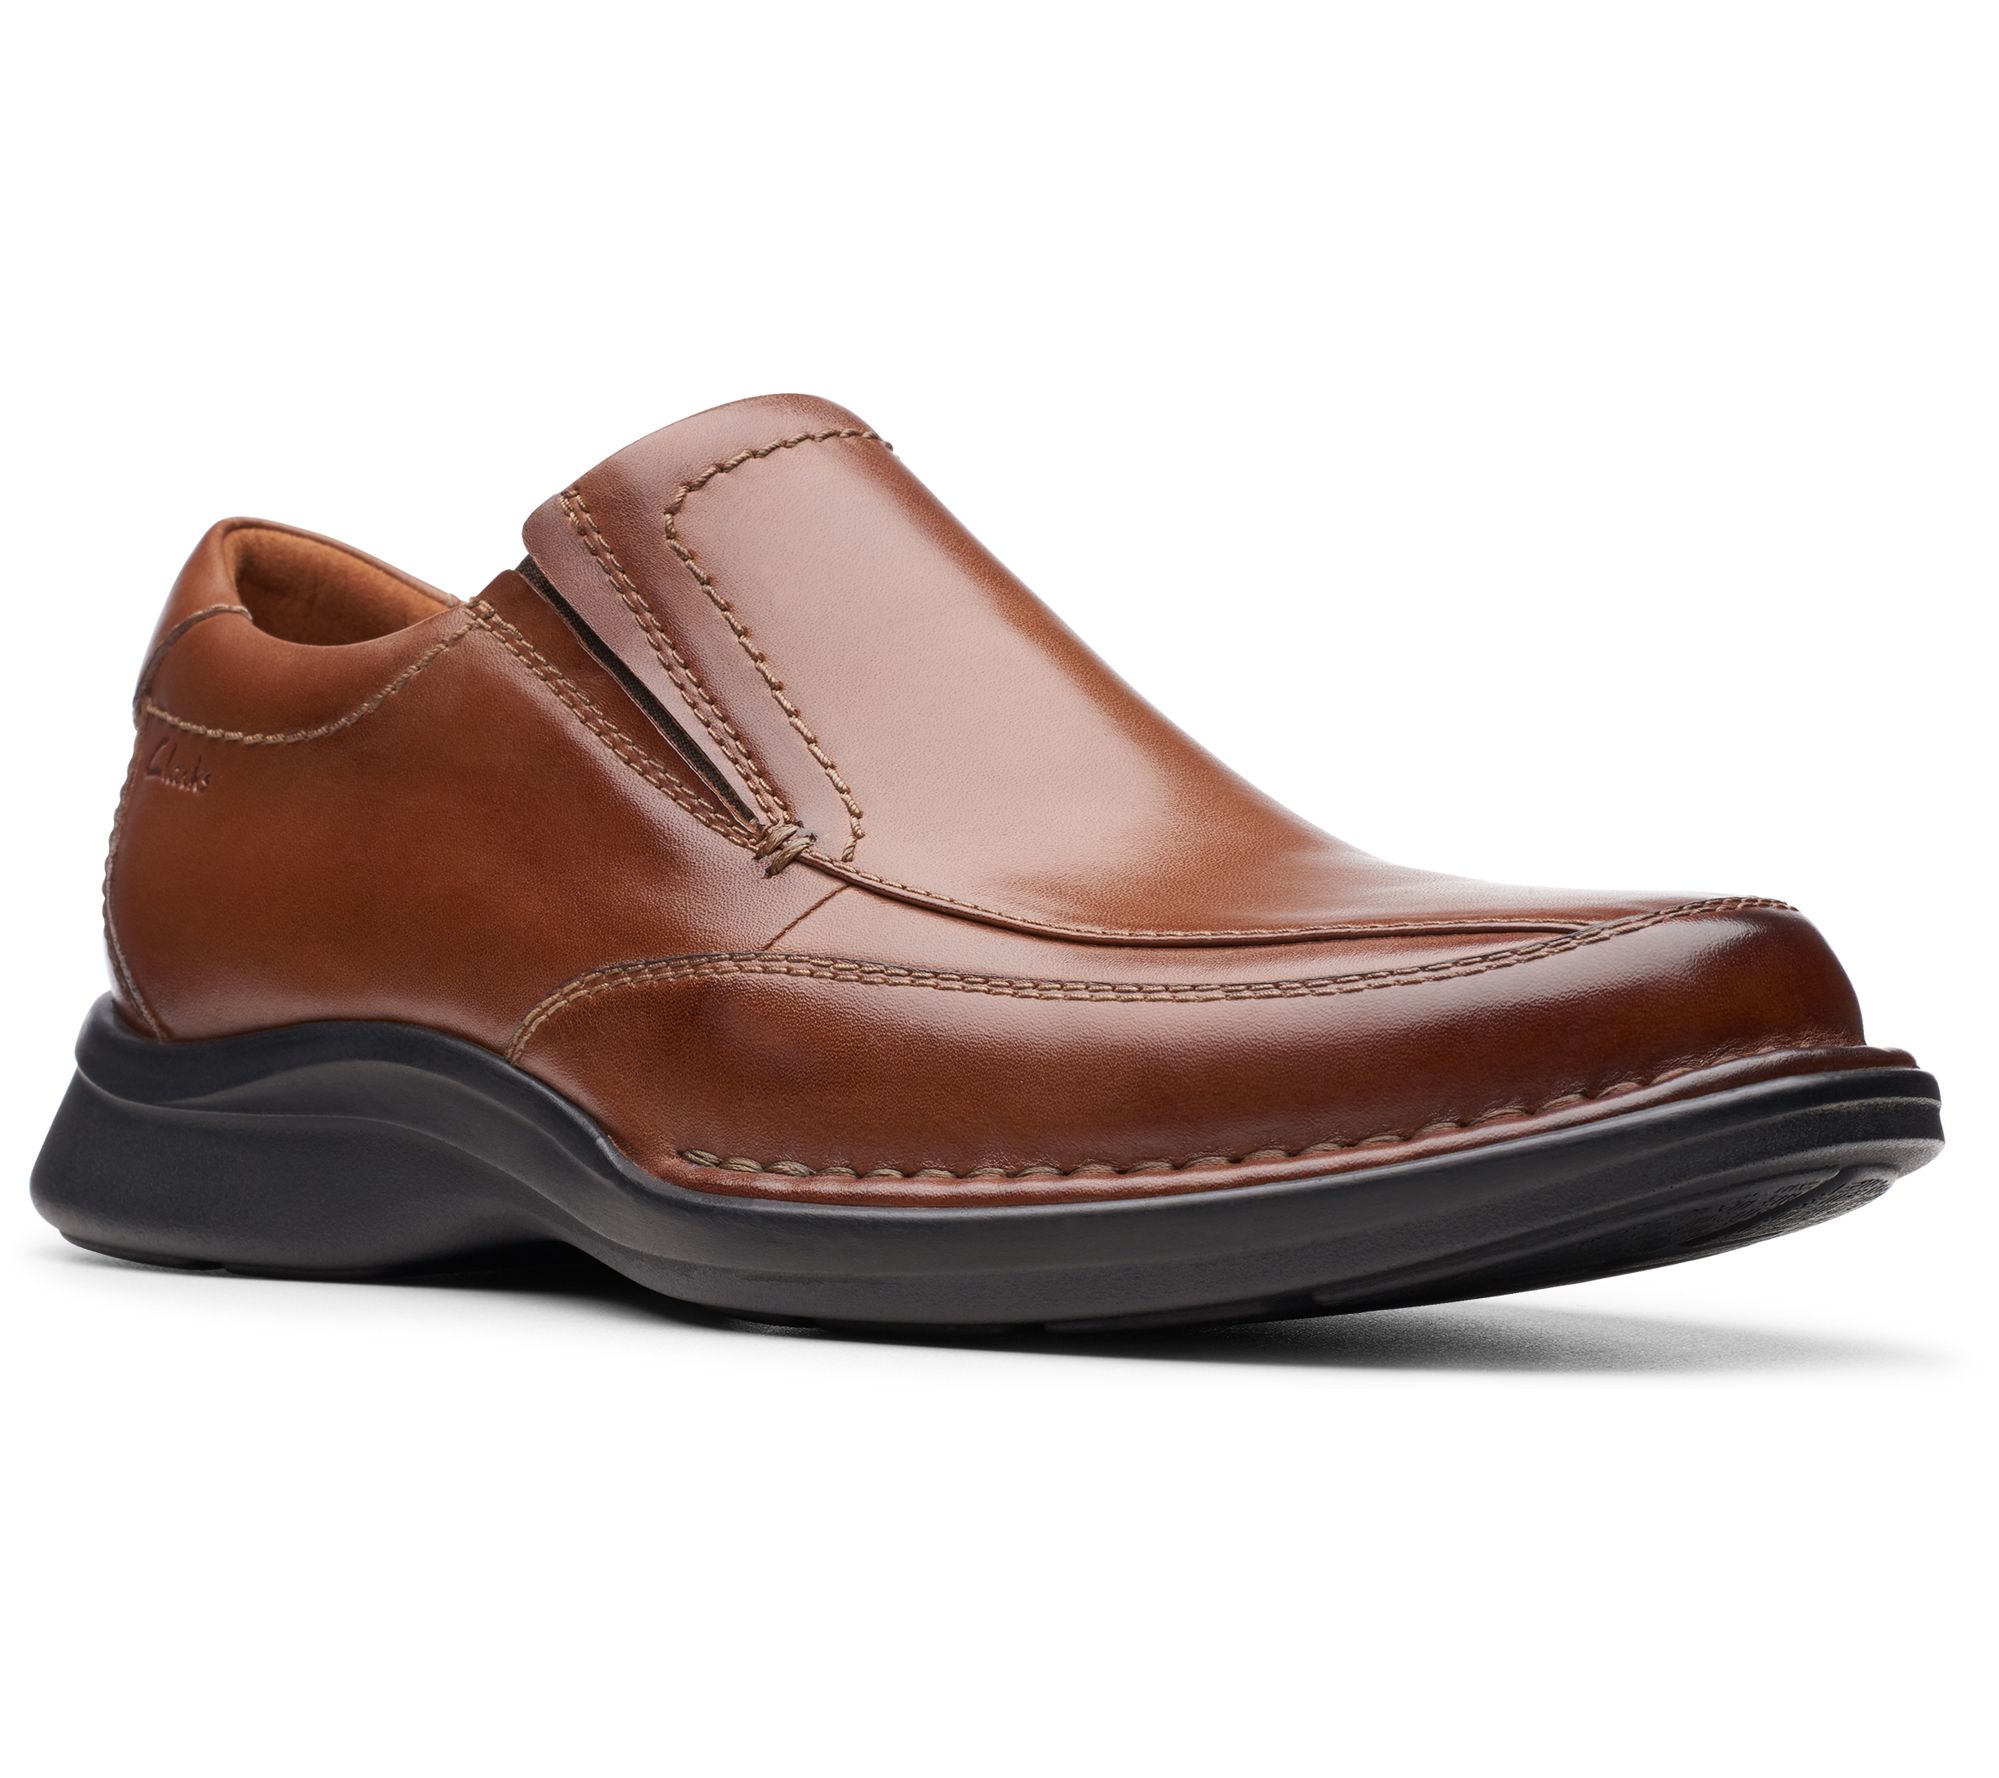 qvc clarks shoes recently on air